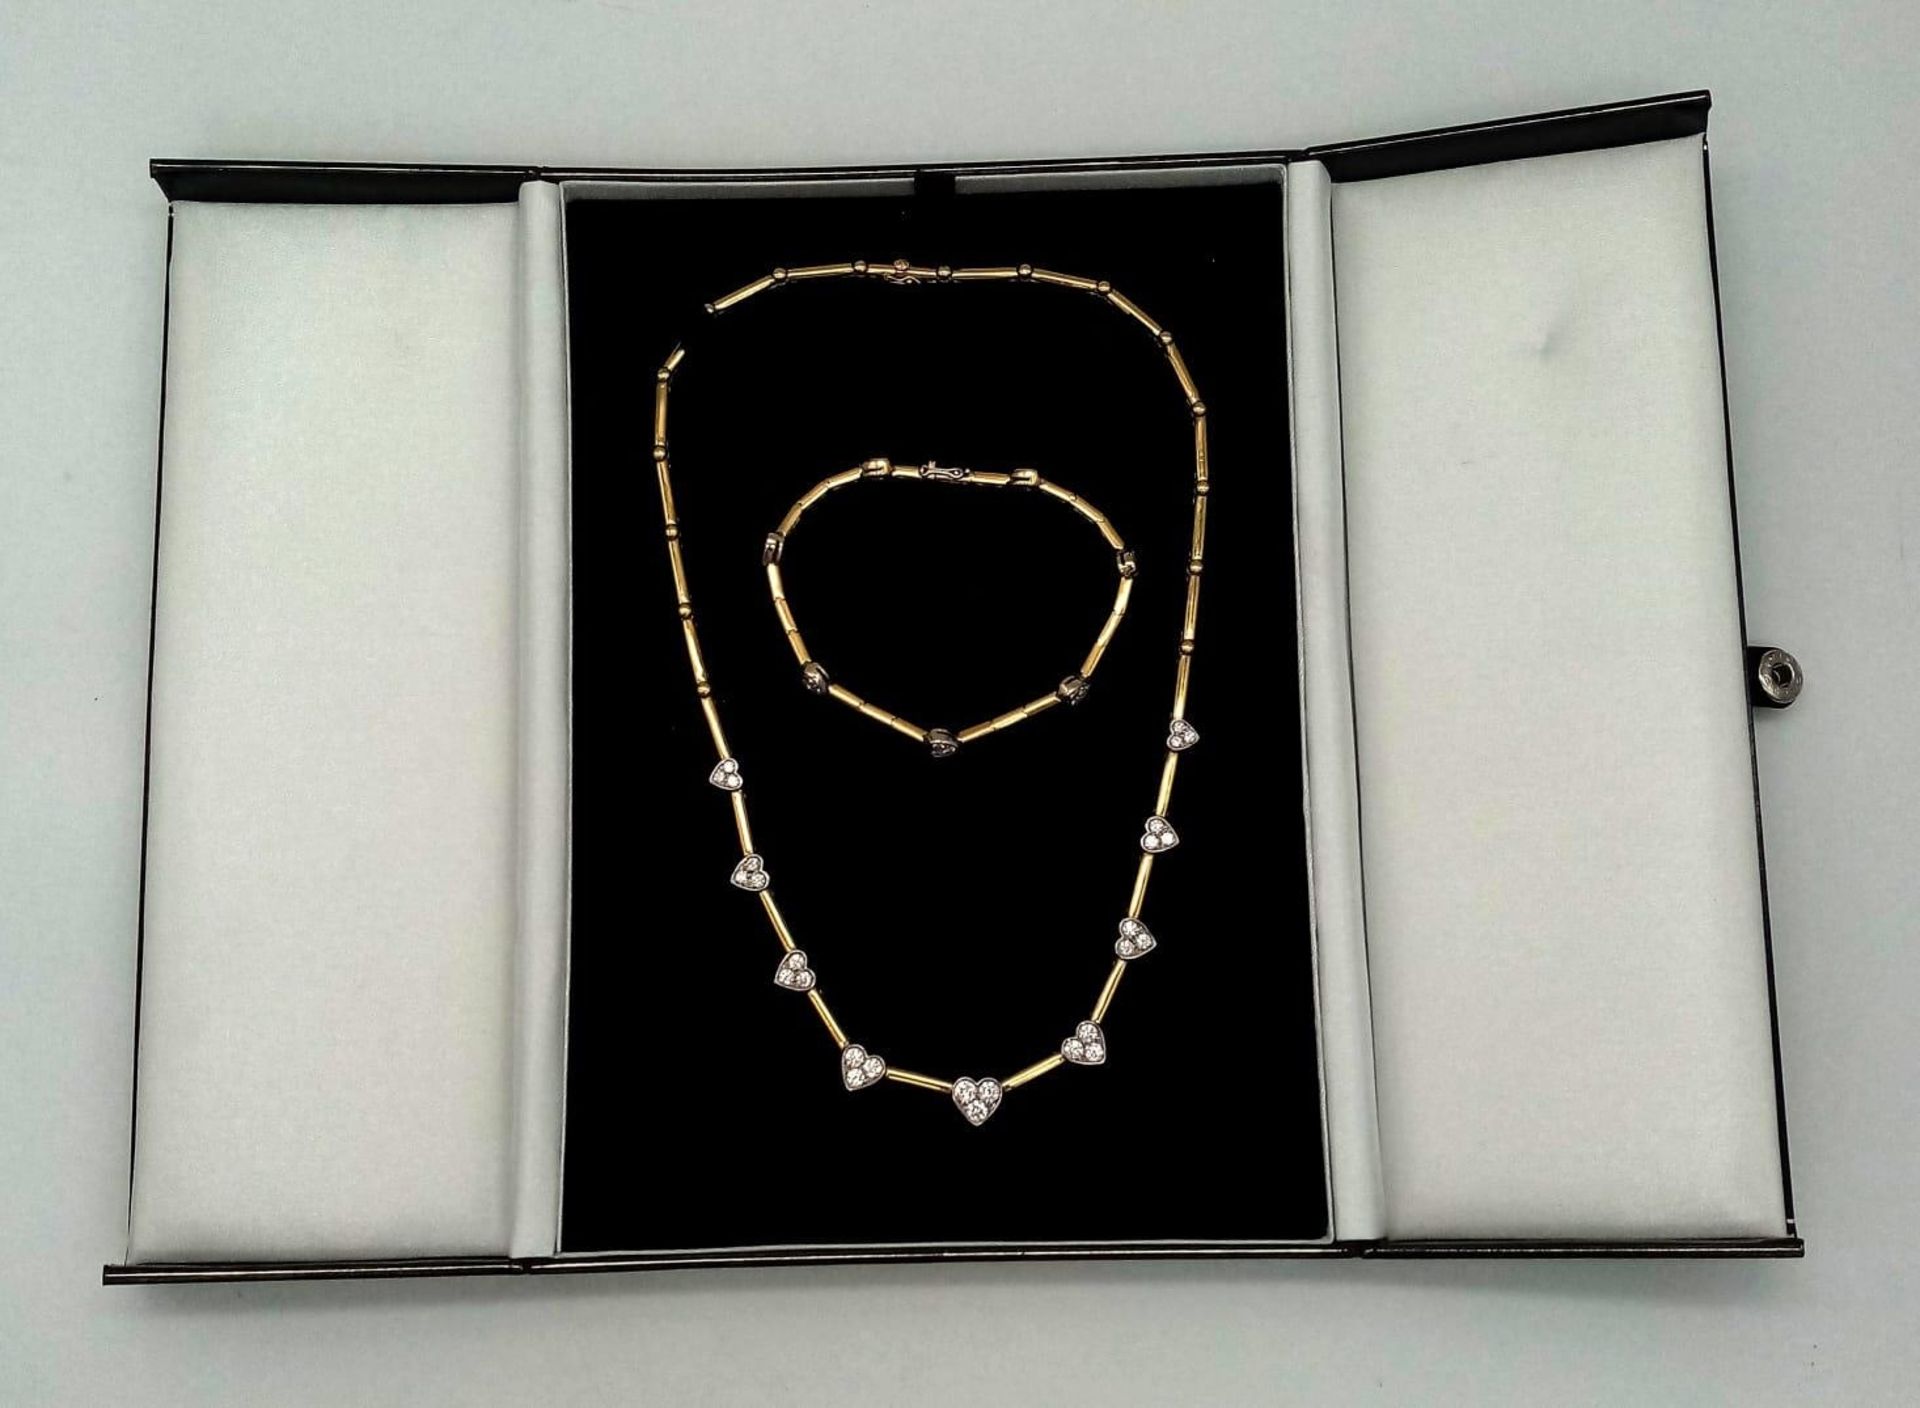 A Gorgeous 18K Gold and Heart-Diamond Necklace and Bracelet Set. The necklace is decorated with - Image 19 of 21